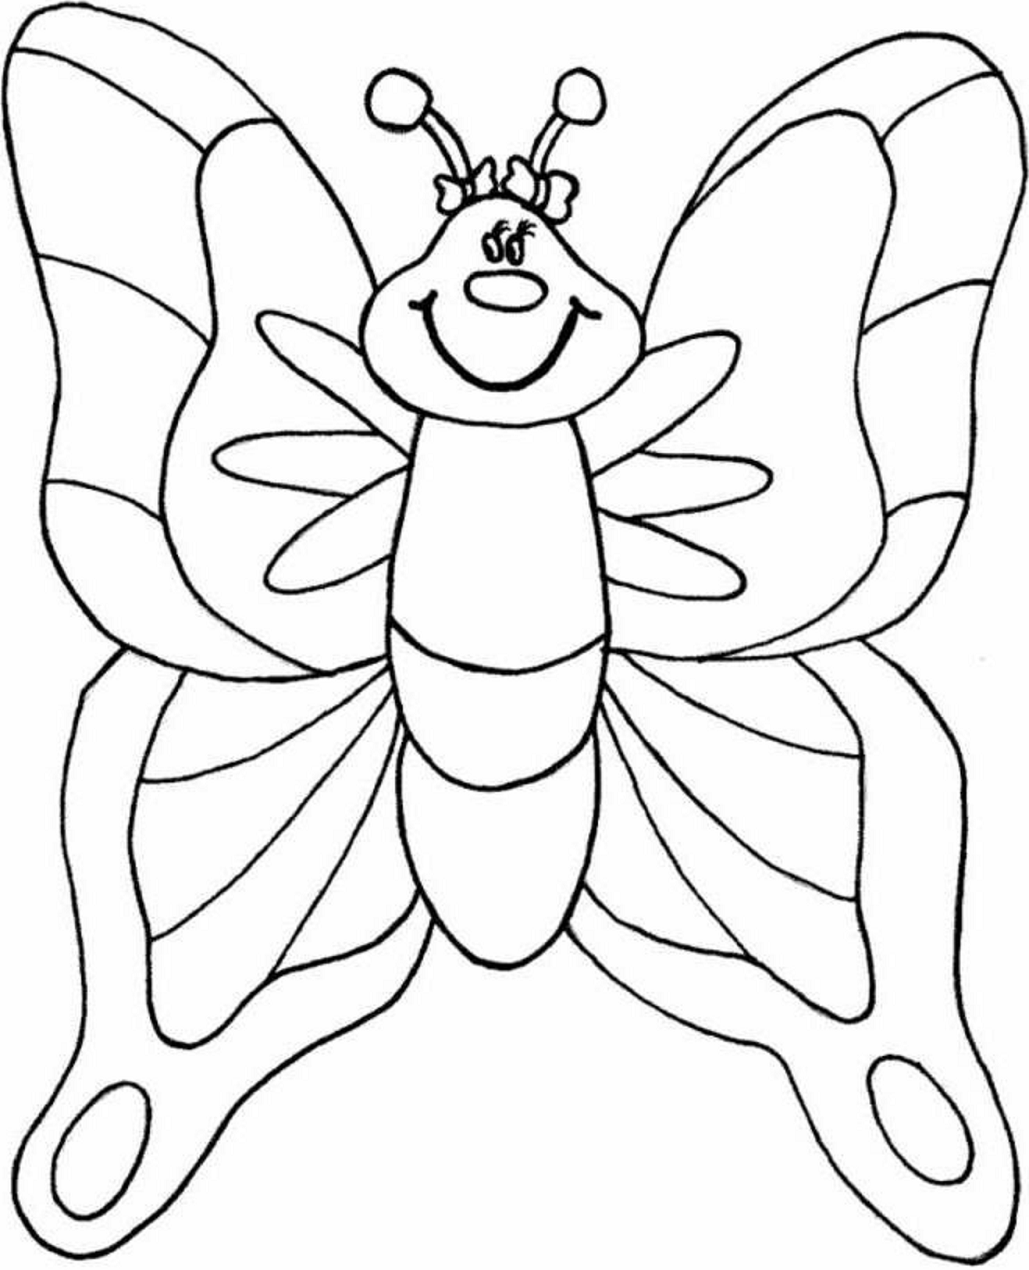 Butterfly For Child Preschool Coloring Page   Free Printable ...